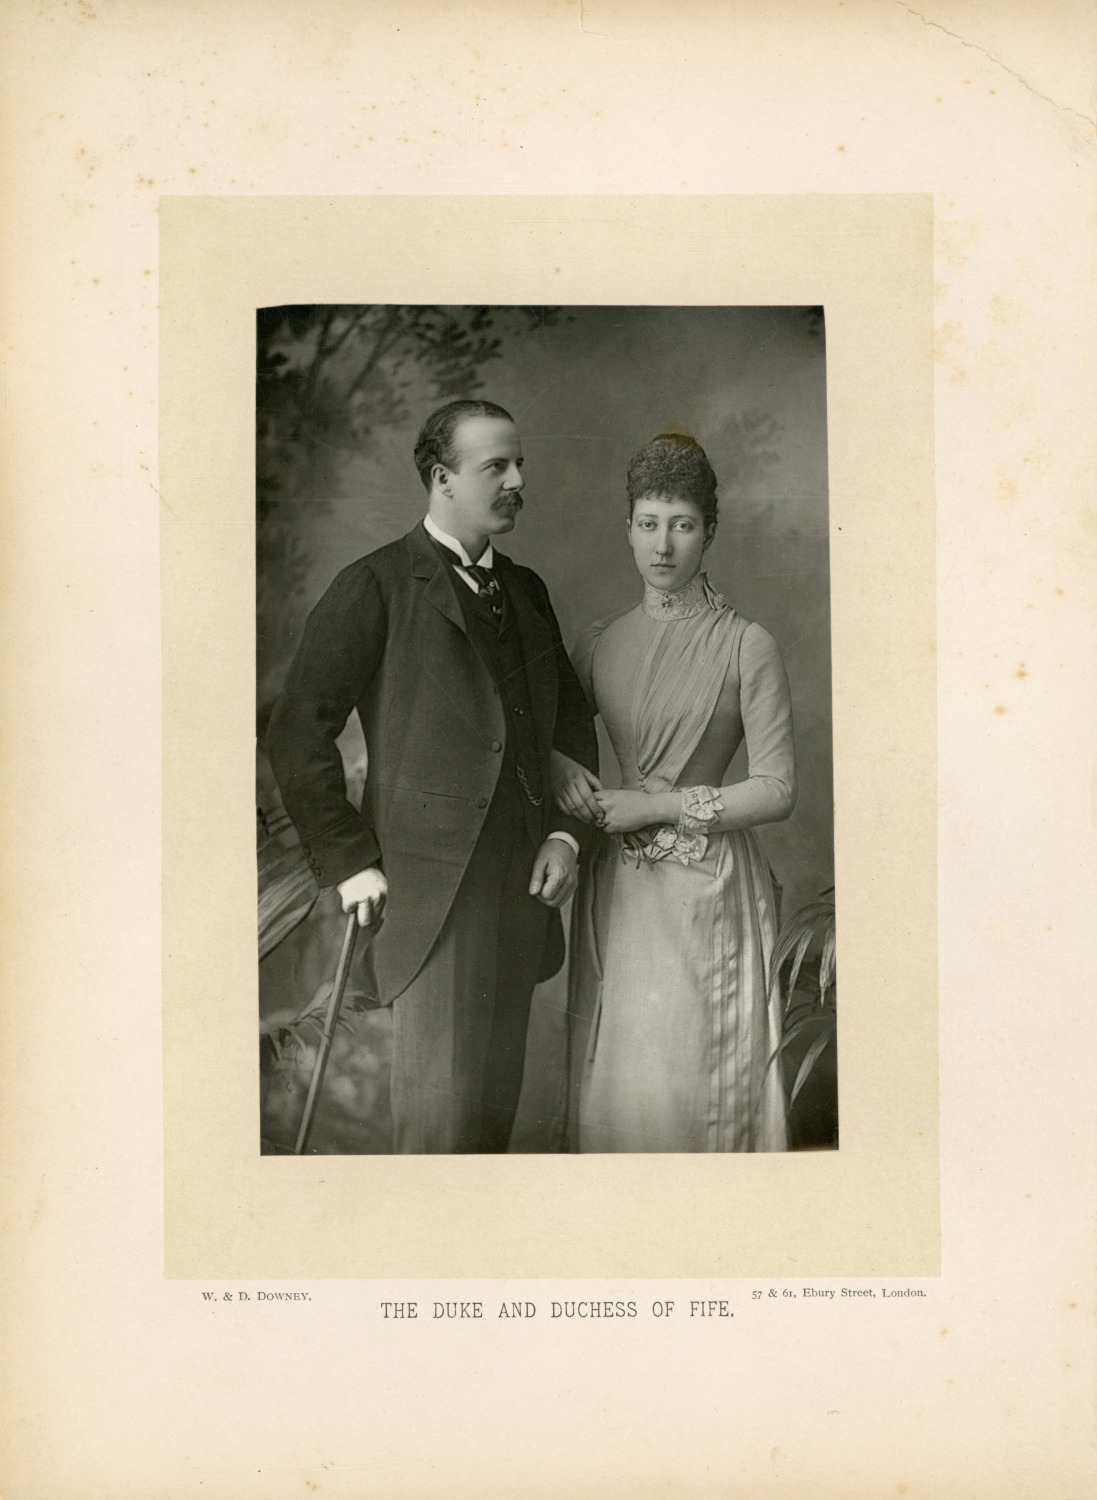 W&D Downey, London, Alexander-William-George Duff (1849-1912) and his wife Lo